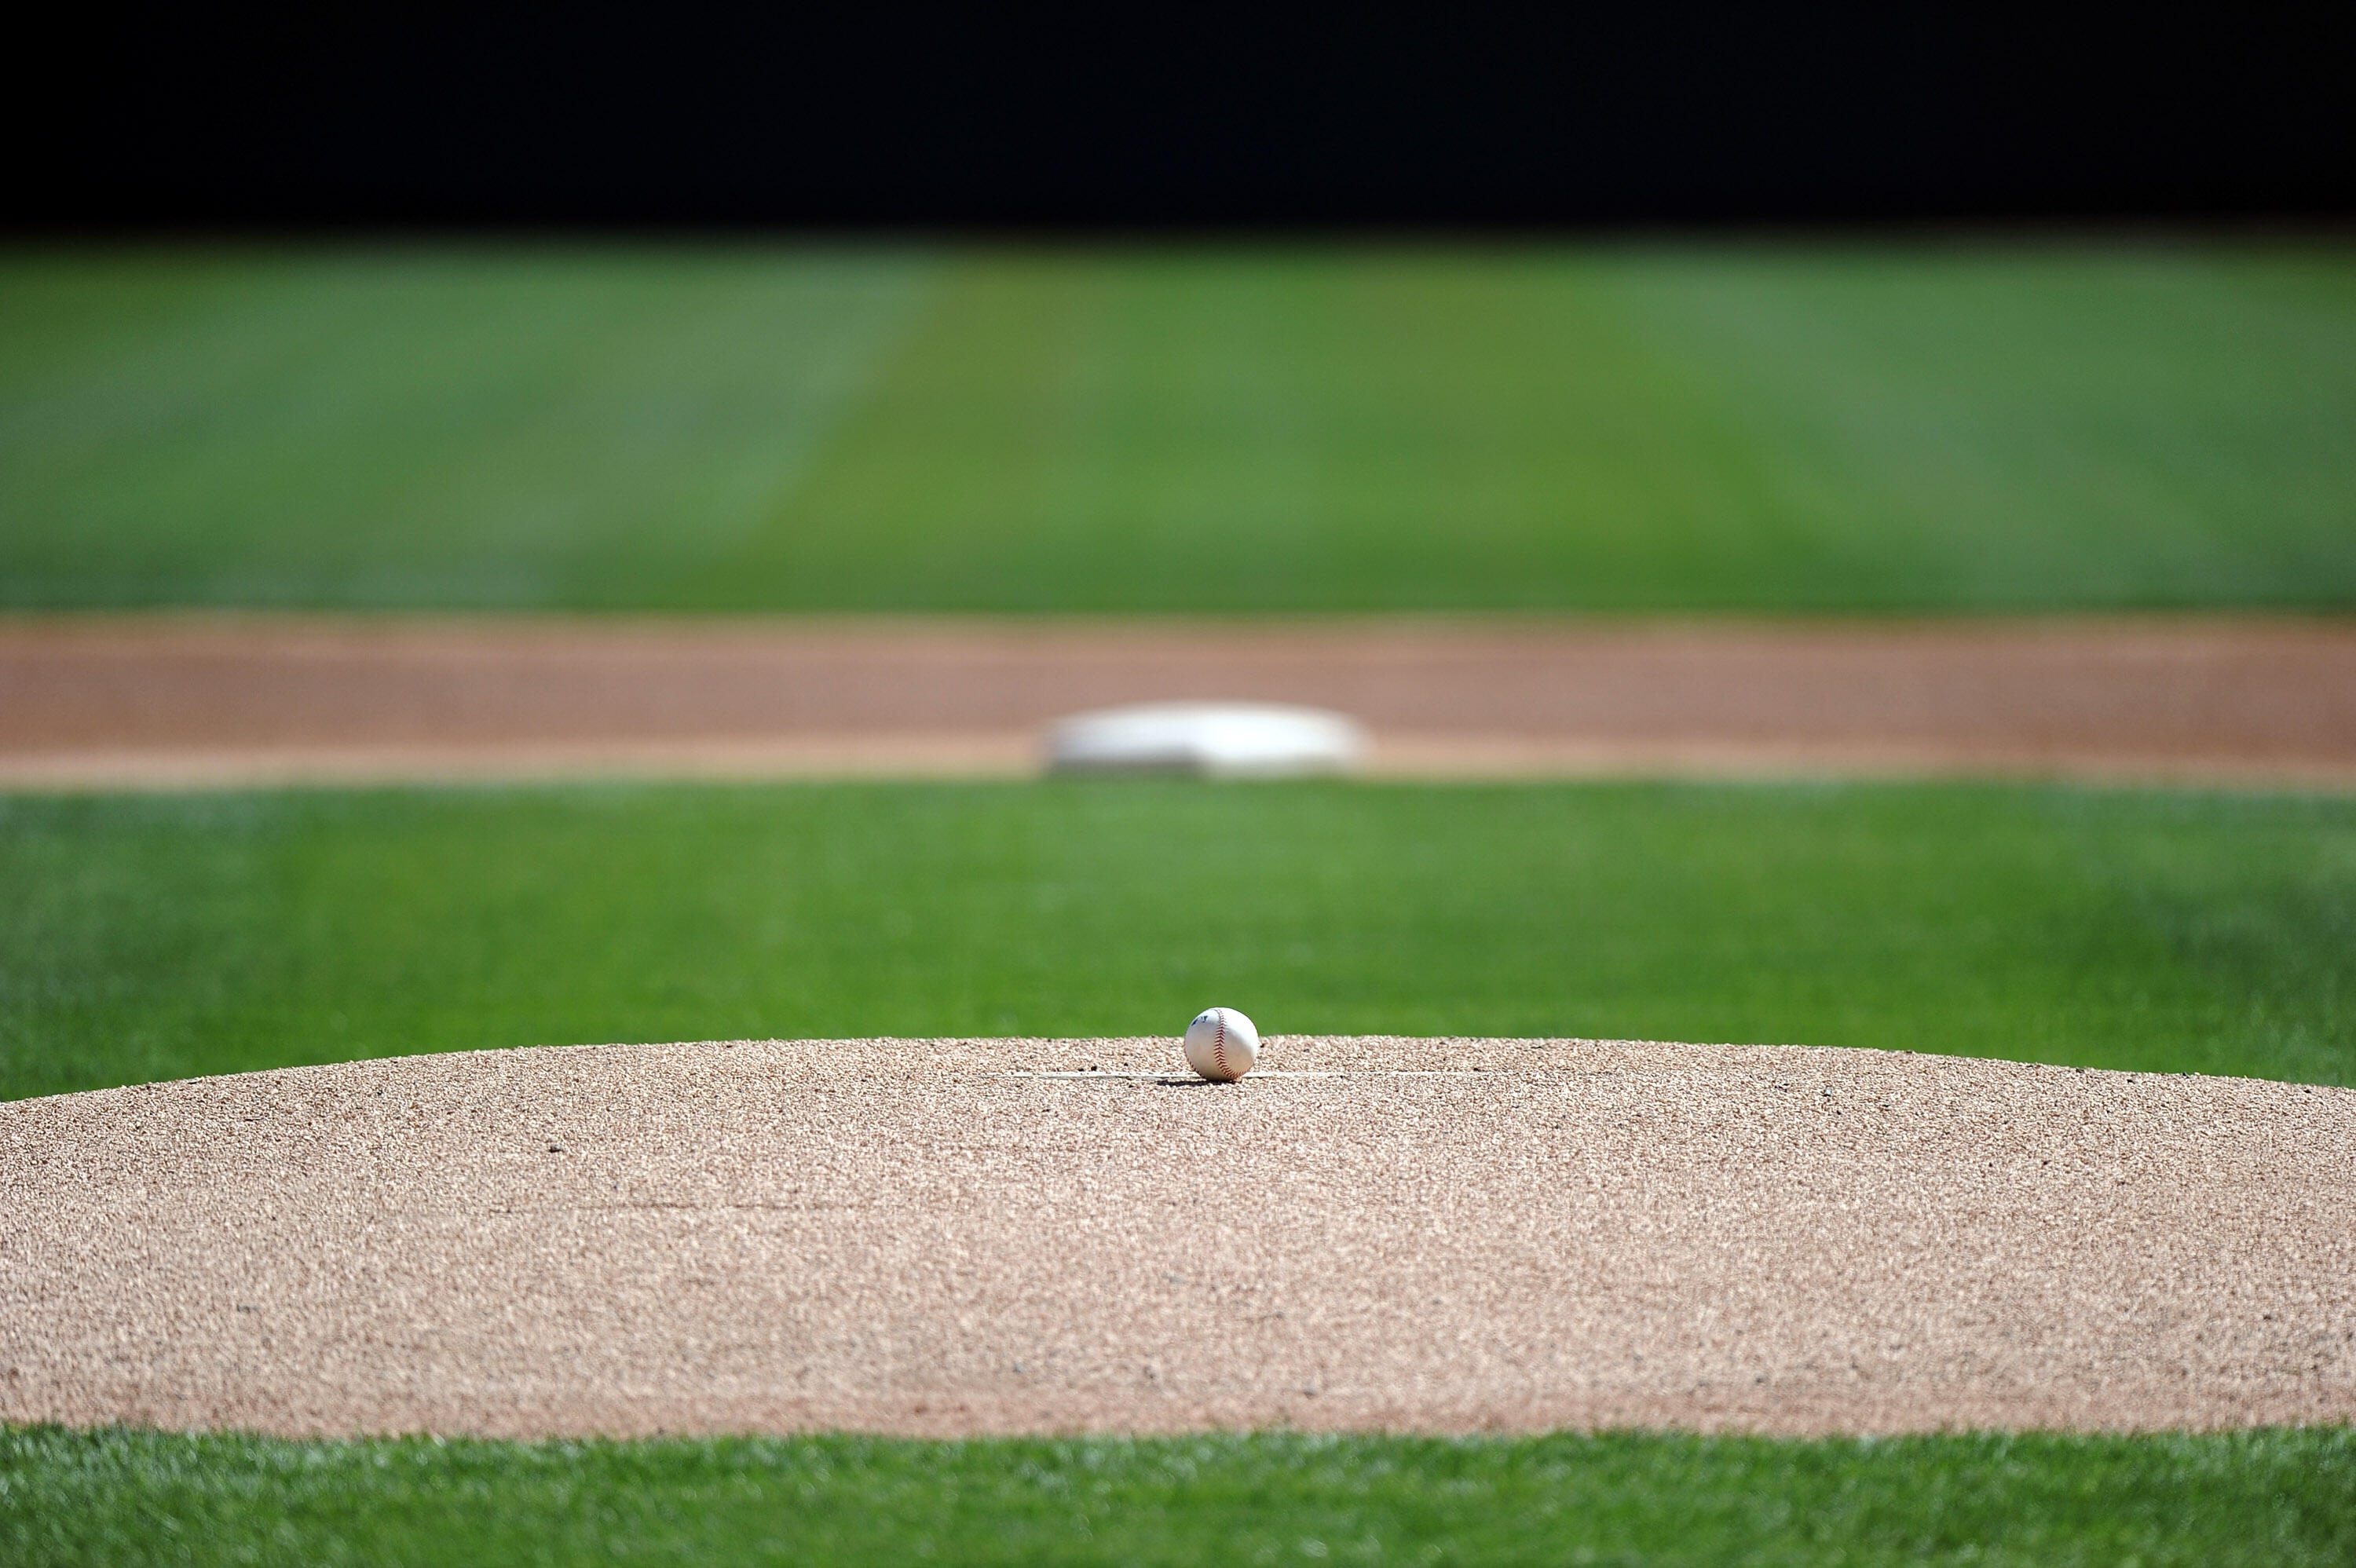 PHOENIX, AZ - FEBRUARY 28:  Ball on the mound before the game between the Chicago White Sox and the Los Angeles Dodgers during spring training at Camelback Ranch on February 28, 2011 in Phoenix, Arizona.  (Photo by Harry How/Getty Images)